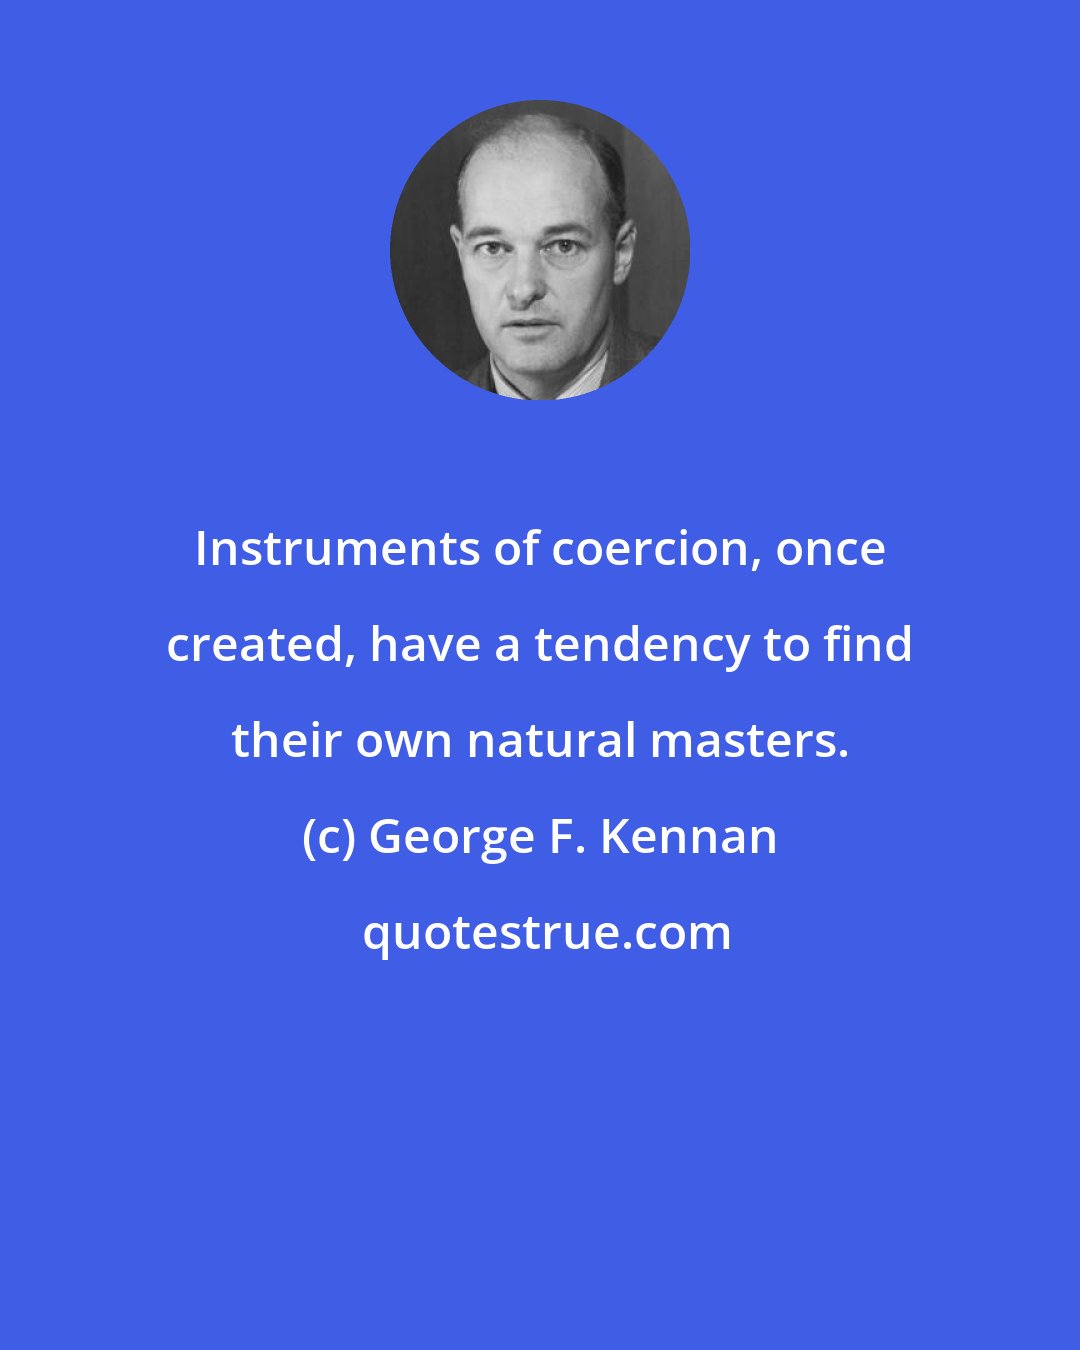 George F. Kennan: Instruments of coercion, once created, have a tendency to find their own natural masters.